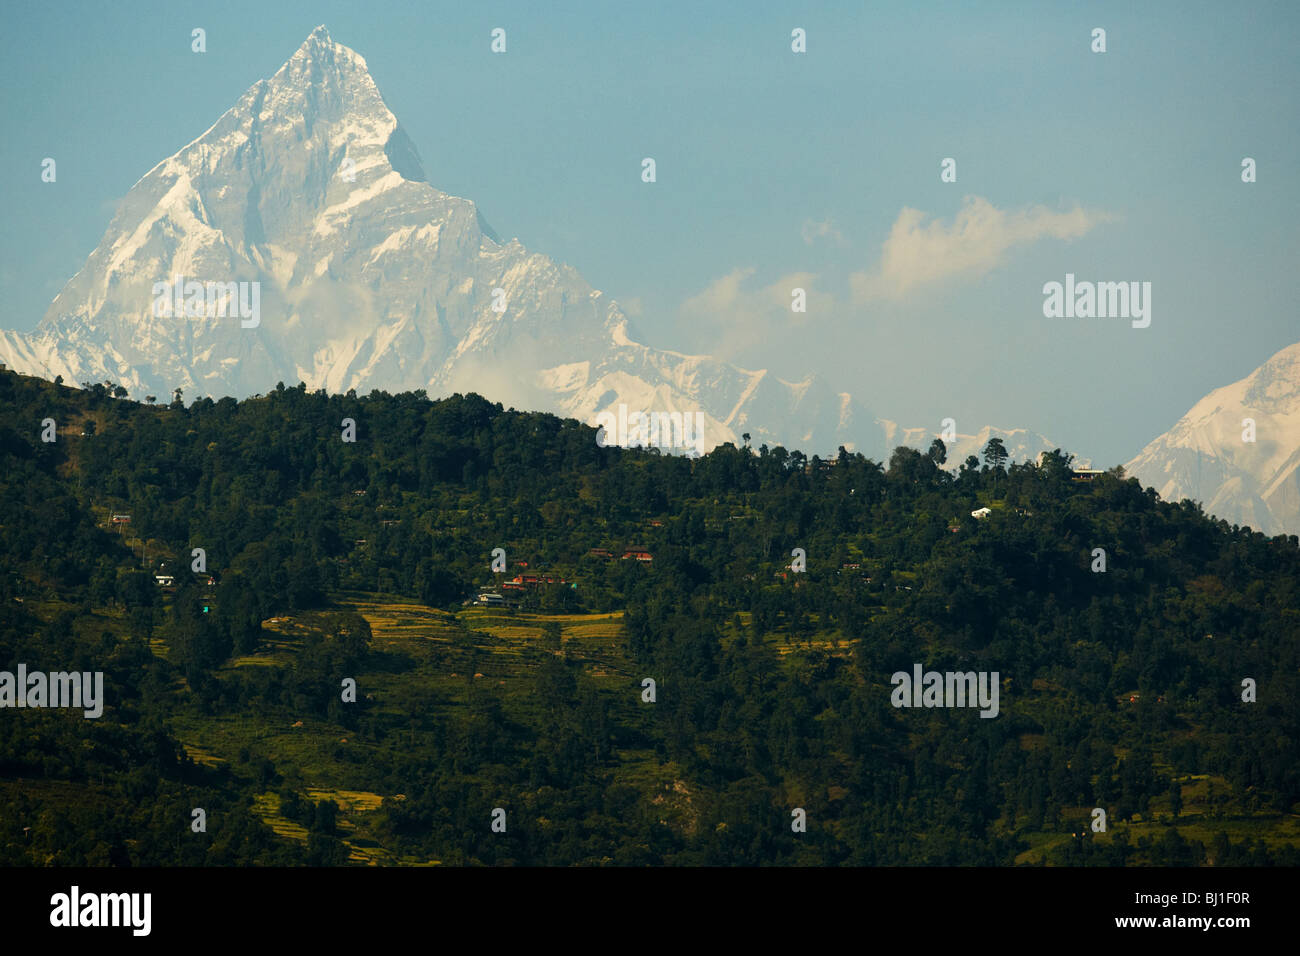 View of Fishtail mountain in Pokhara, Nepal on Monday October 26, 2009. Stock Photo